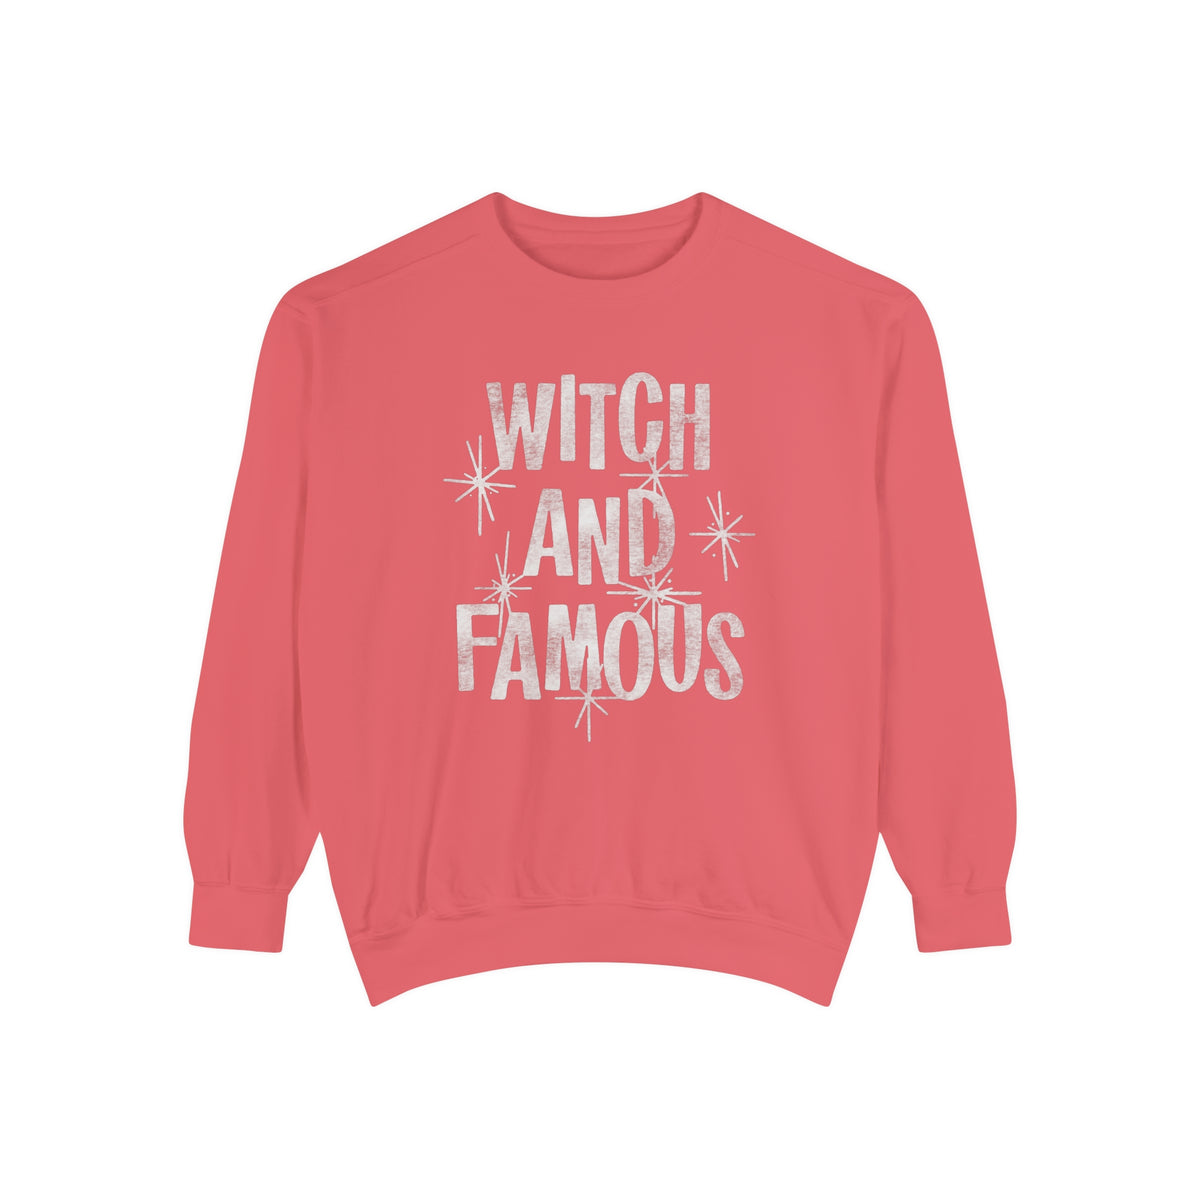 Witch and Famous Comfort Colors Unisex Garment-Dyed Sweatshirt